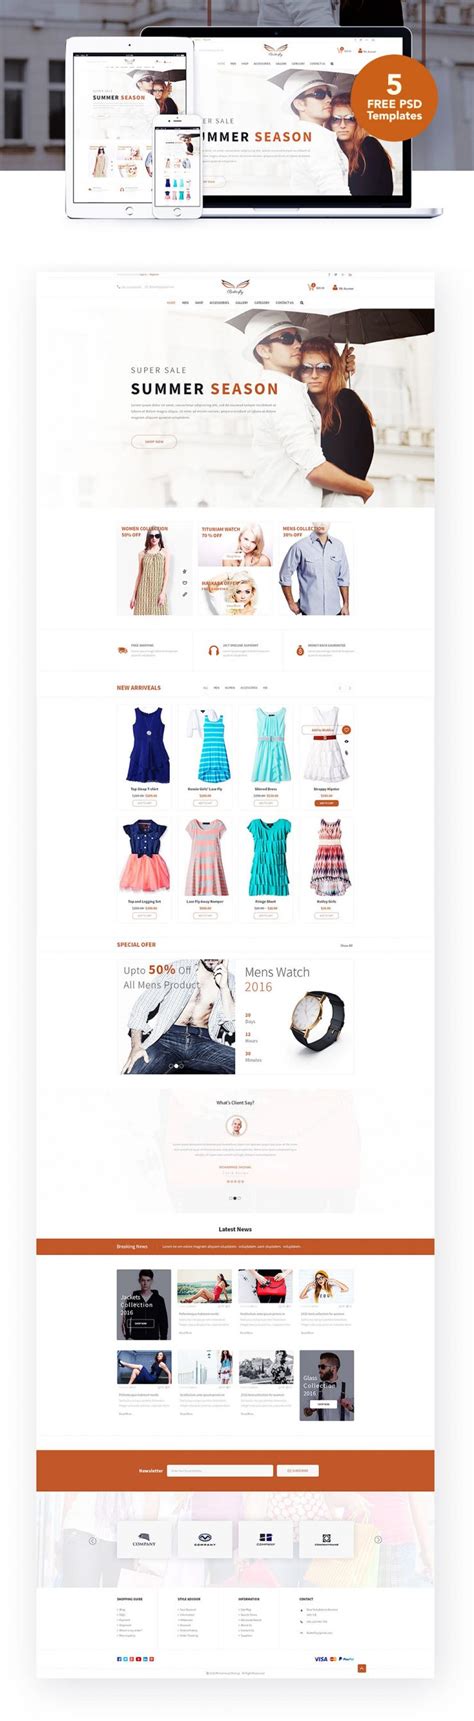 Fashion eCommerce Website Templates Free PSD – Download PSD